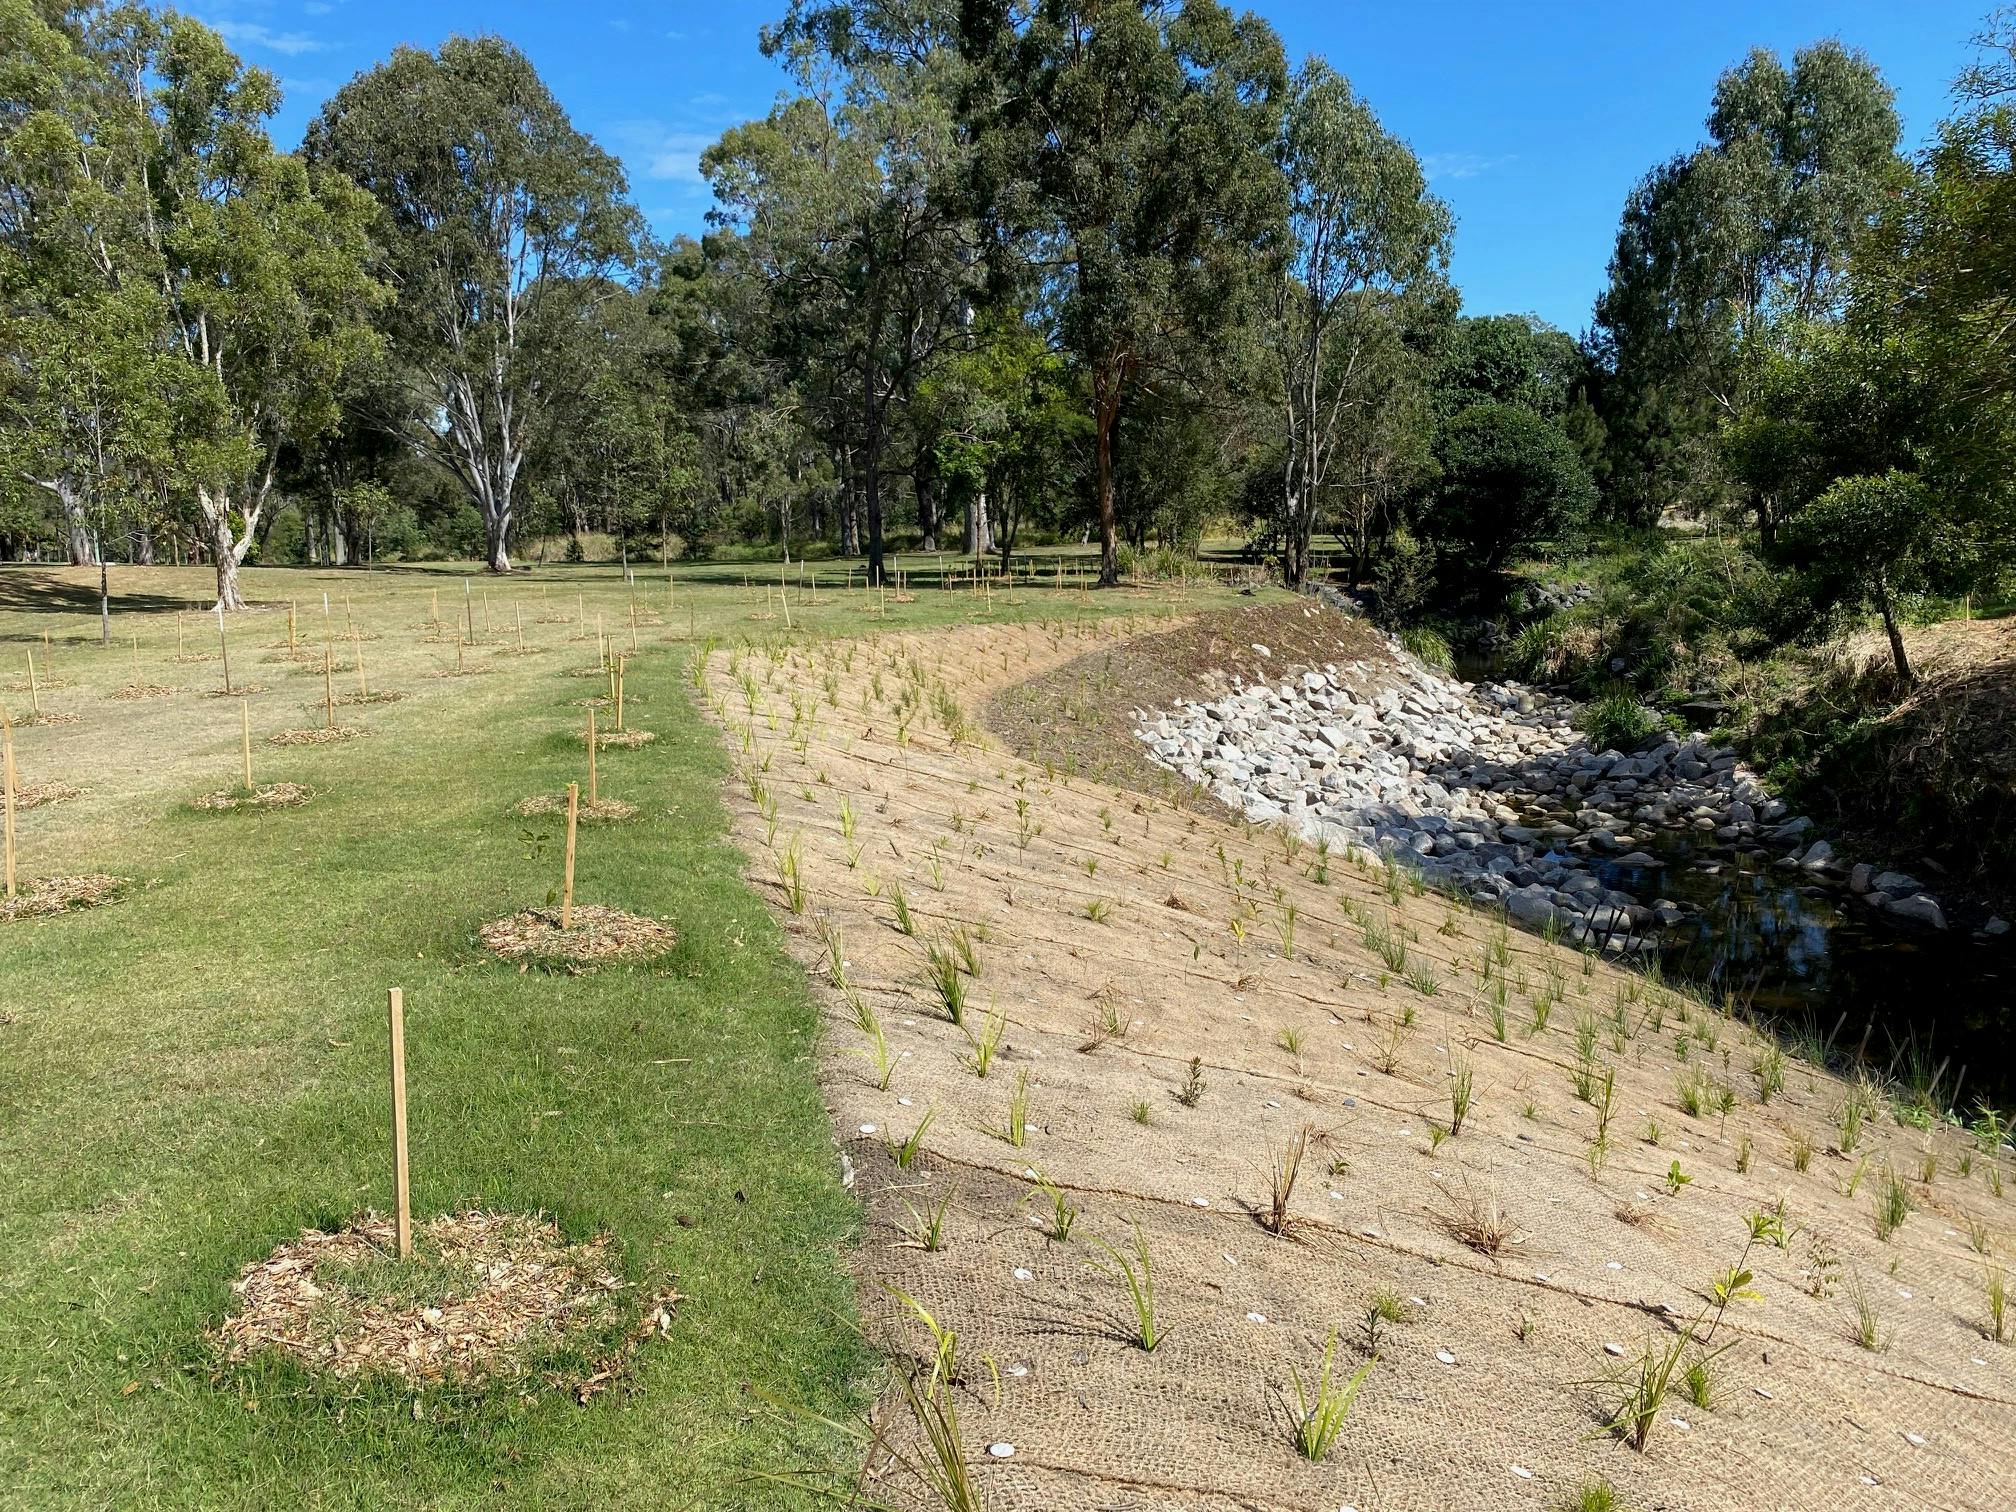 Downfall Creek - another view of the rehabilitated works on the creek bank